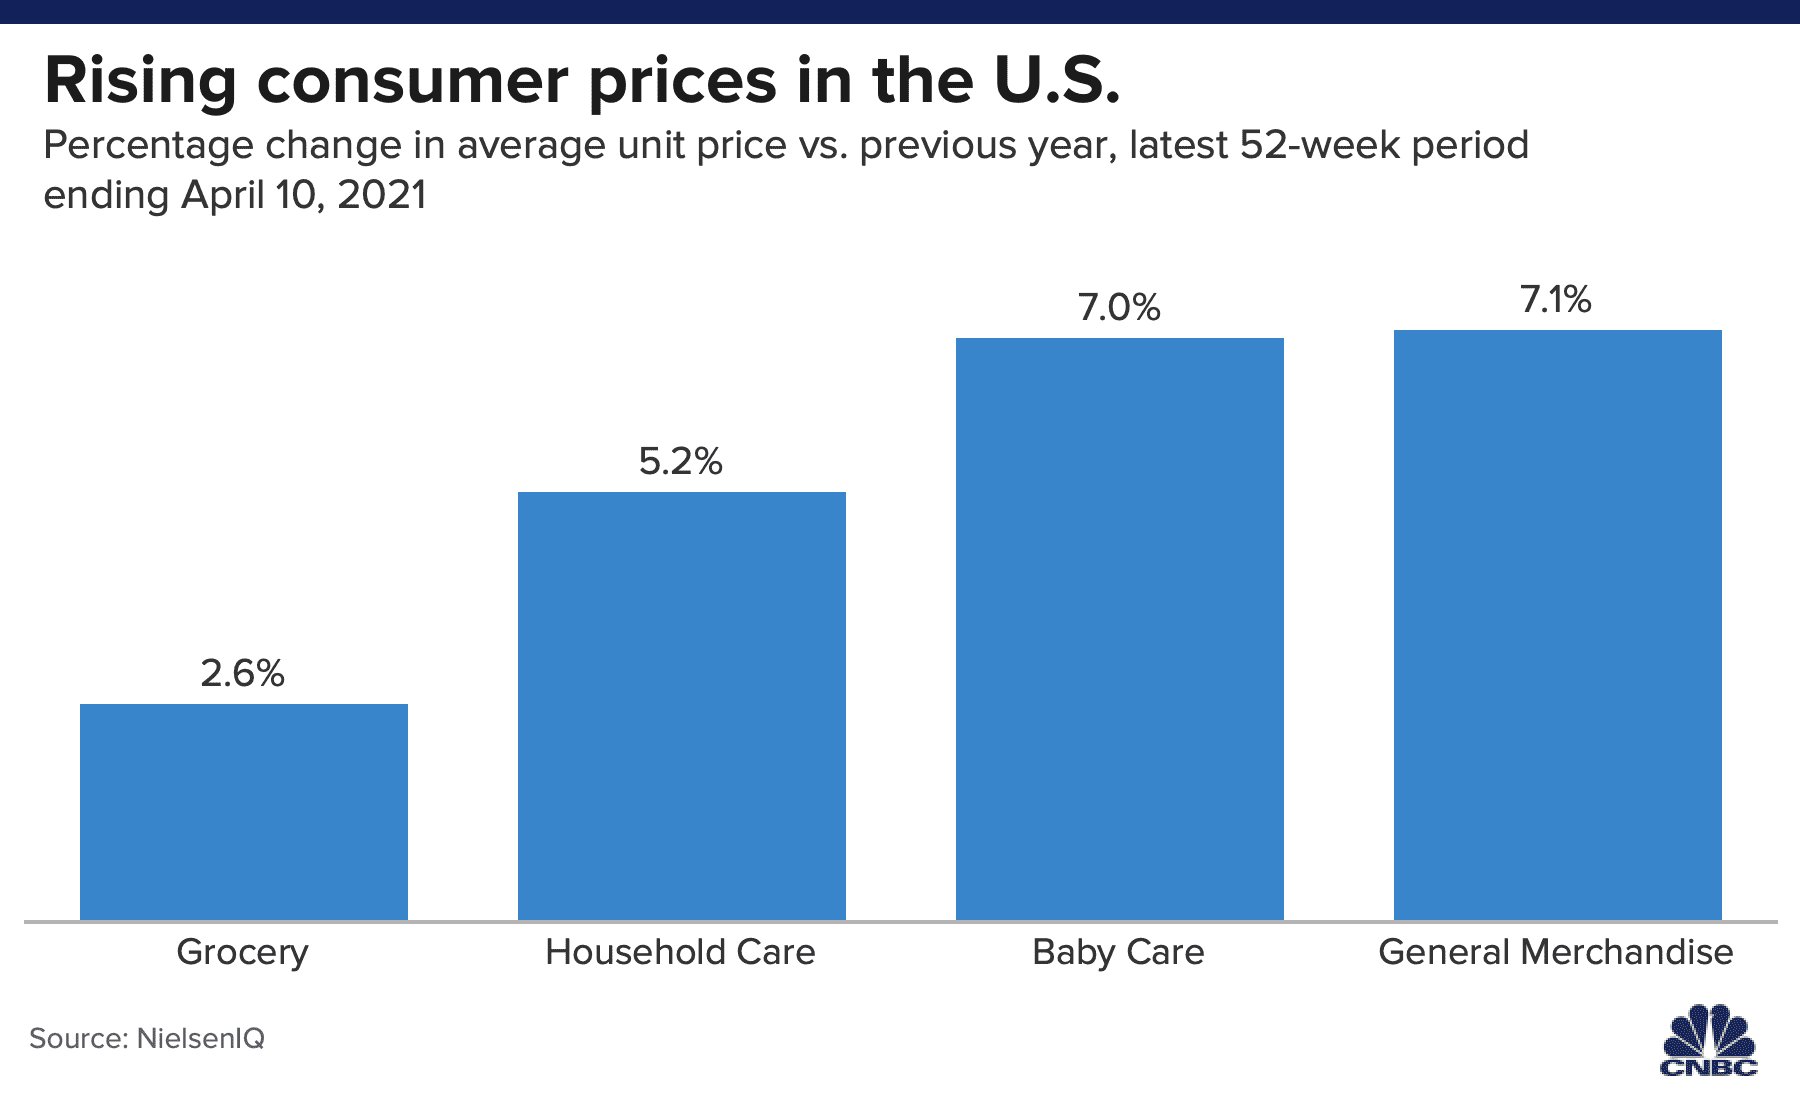 Attention shoppers: Price hikes are ahead, but consumer companies hope you won’t notice